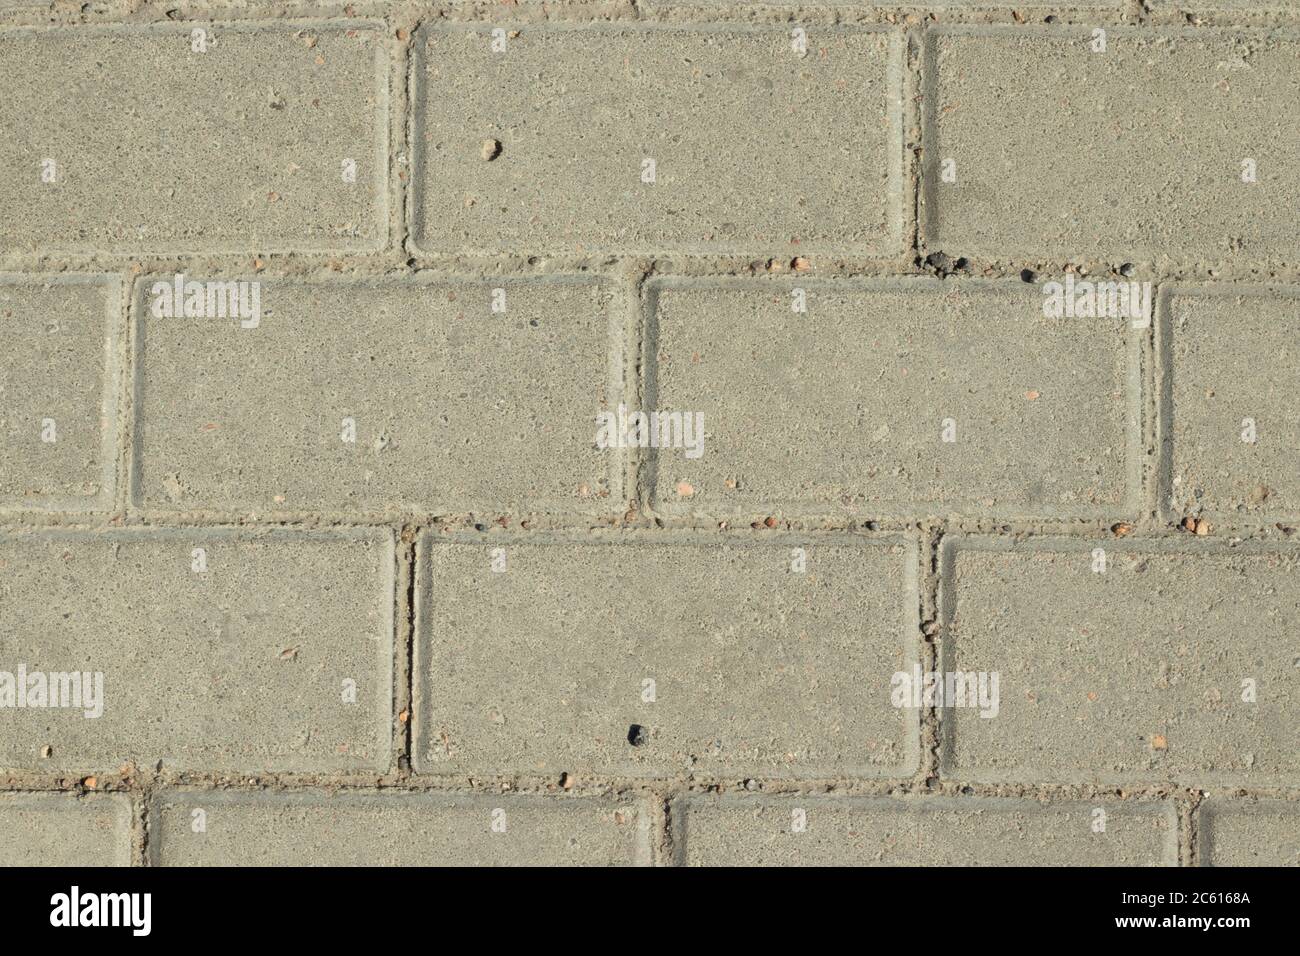 Stone brick wall or floor background. Textured copy space Stock Photo